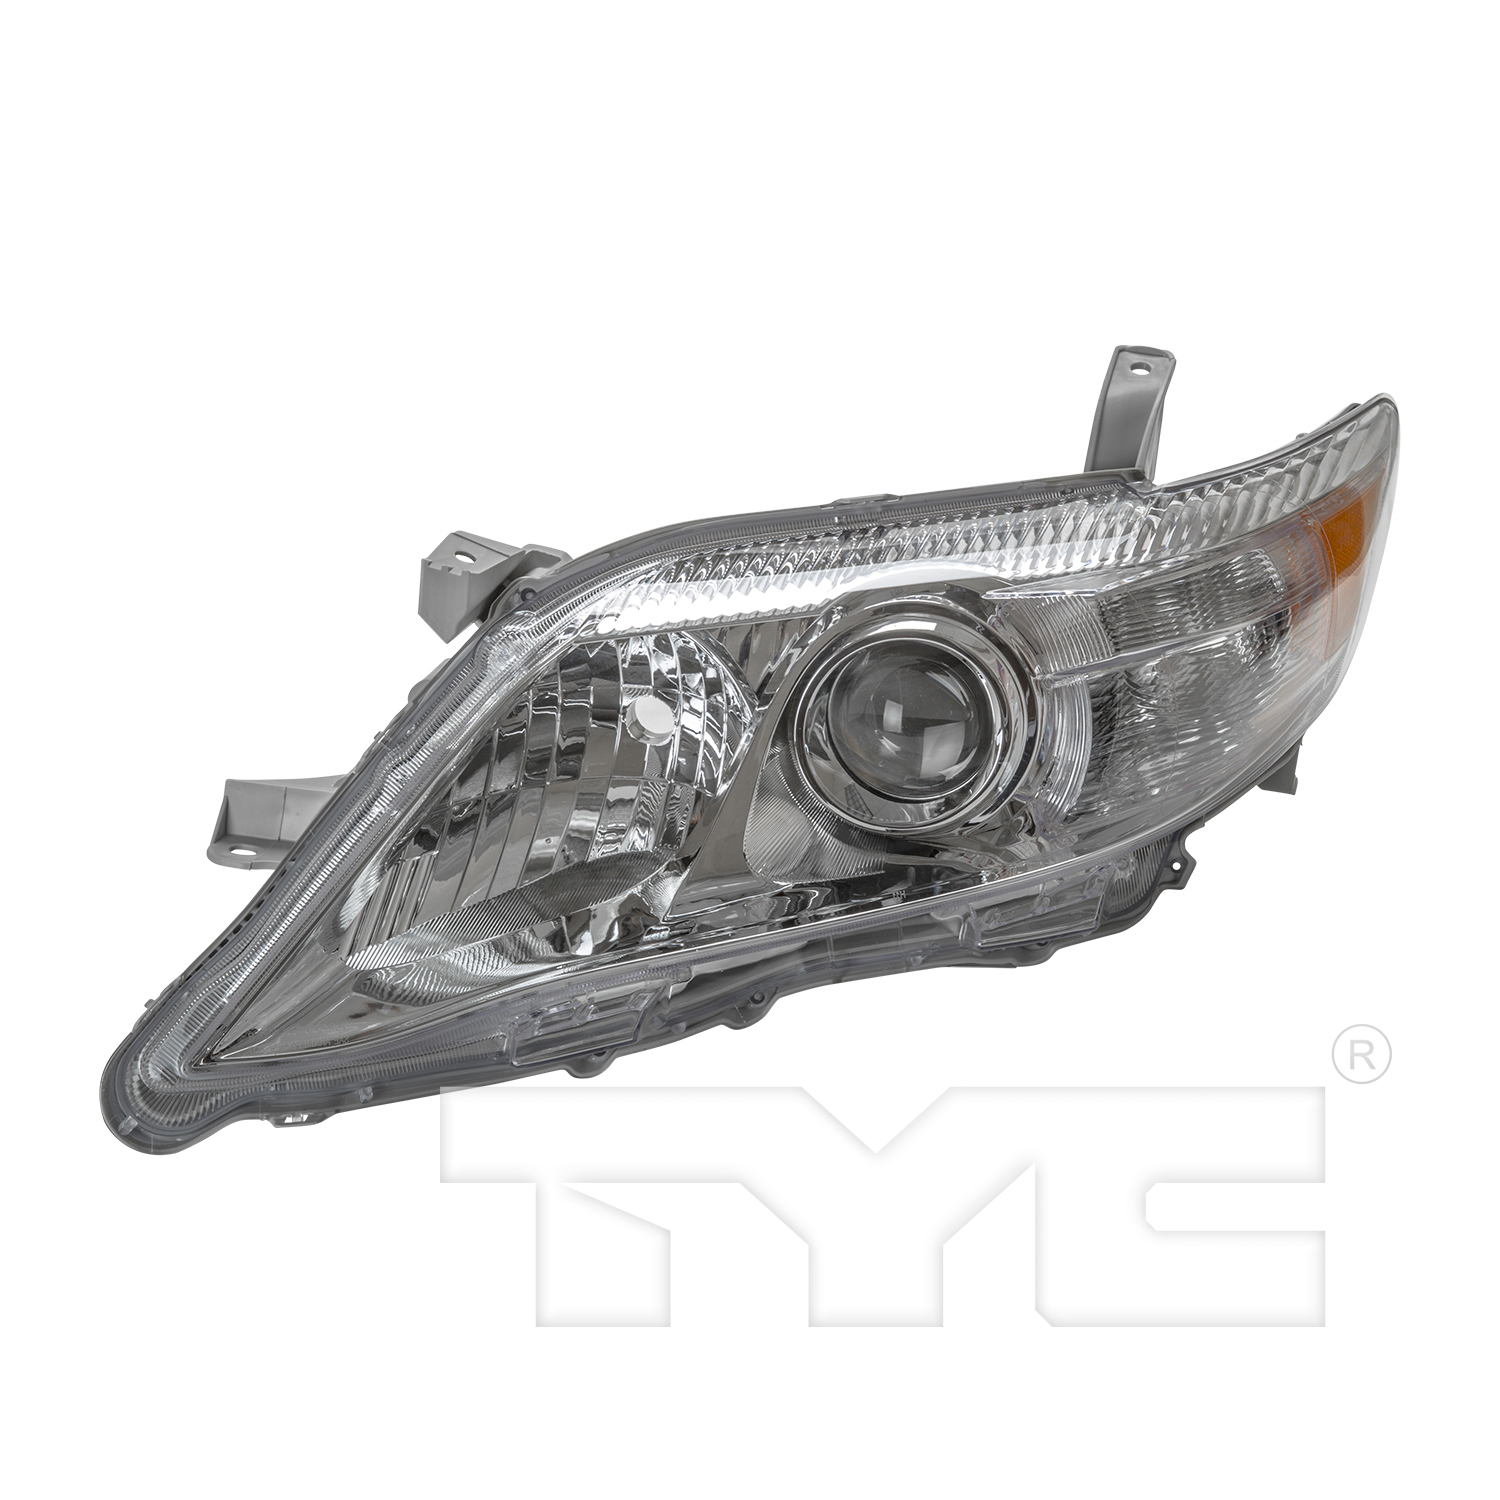 Aftermarket HEADLIGHTS for TOYOTA - CAMRY, CAMRY,10-11,LT Headlamp lens/housing